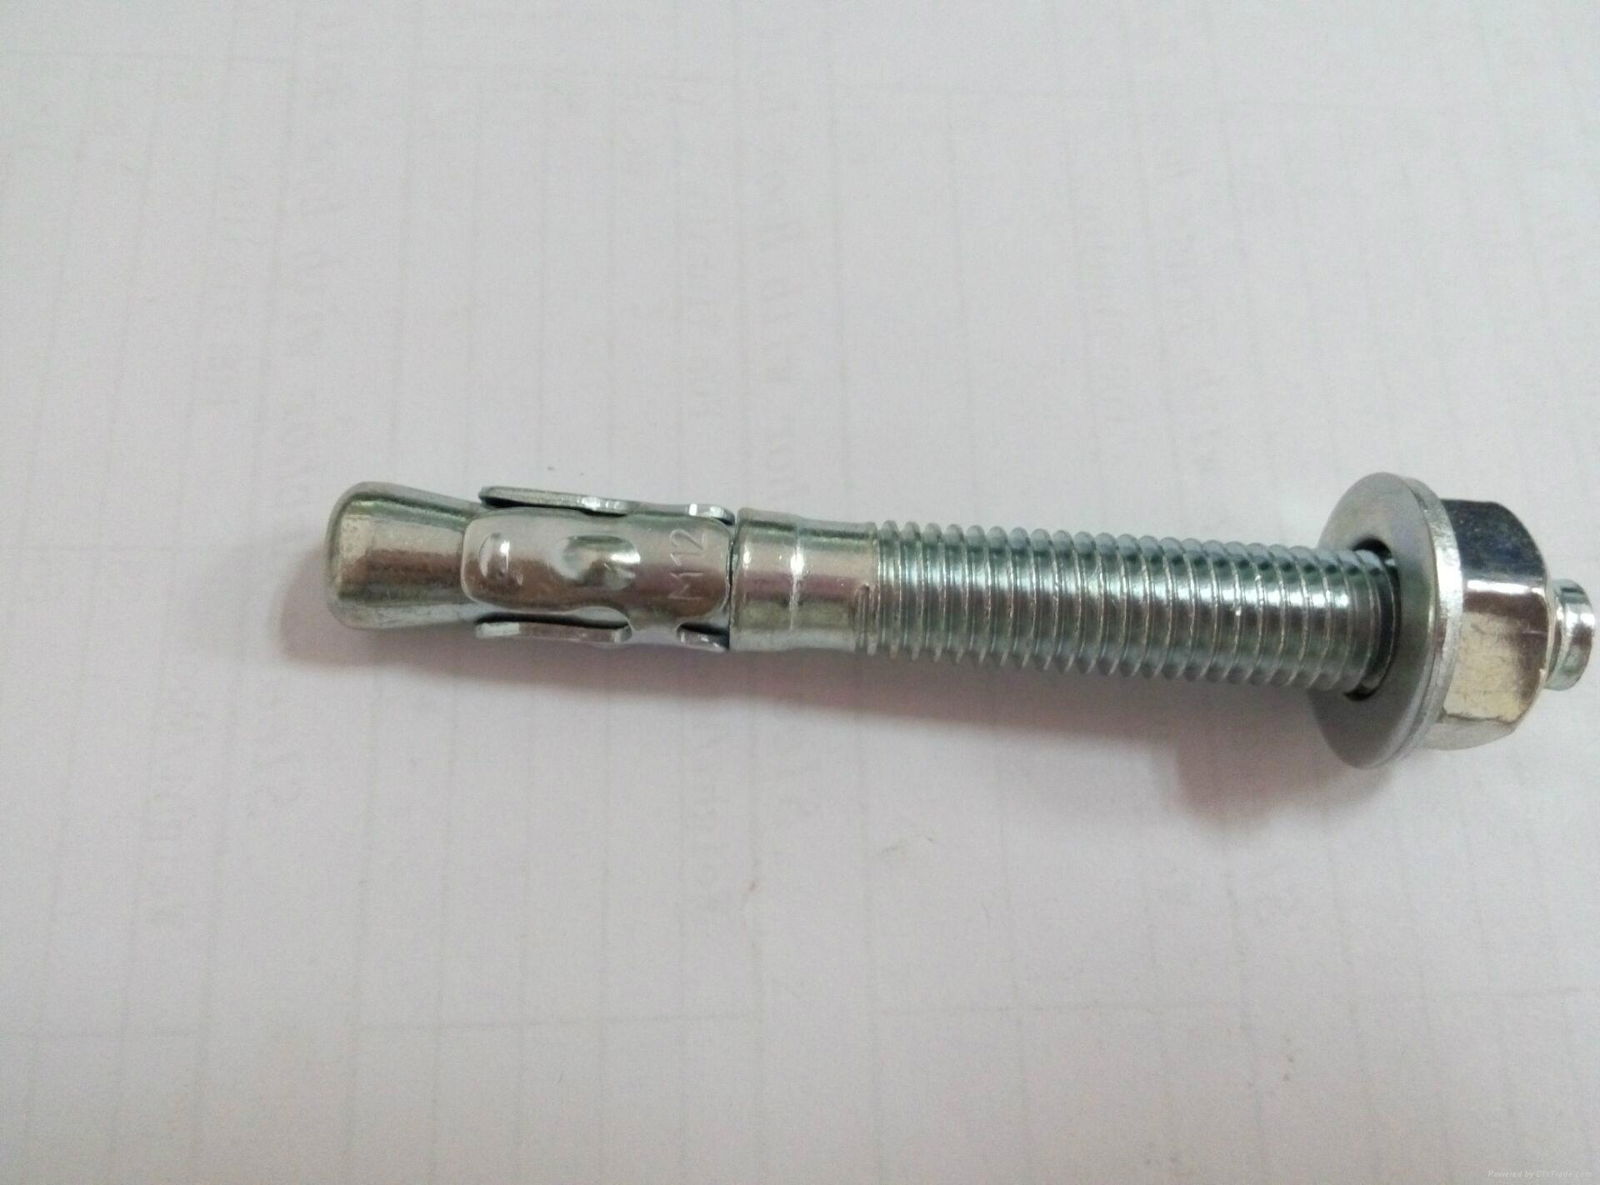 HIGH QUALITY WEDGE ANCHOR MADE IN CHINA 2